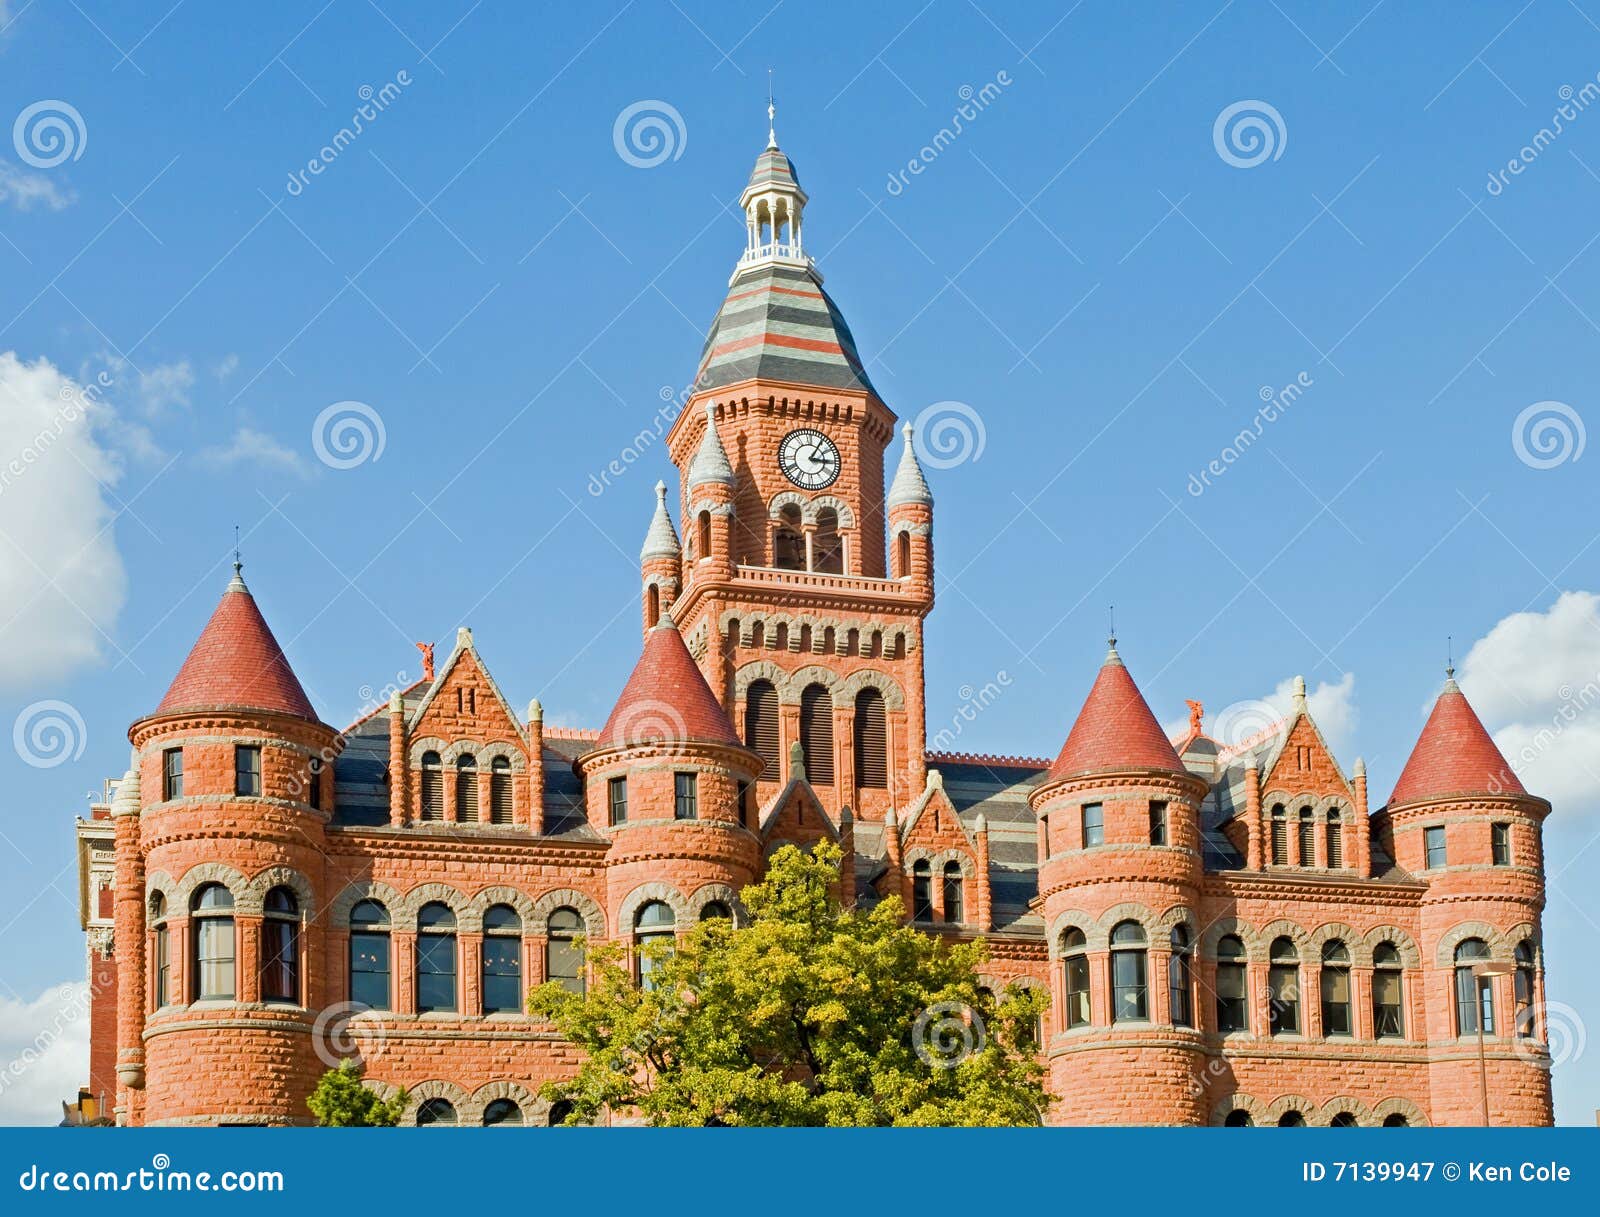 dallas old red museum